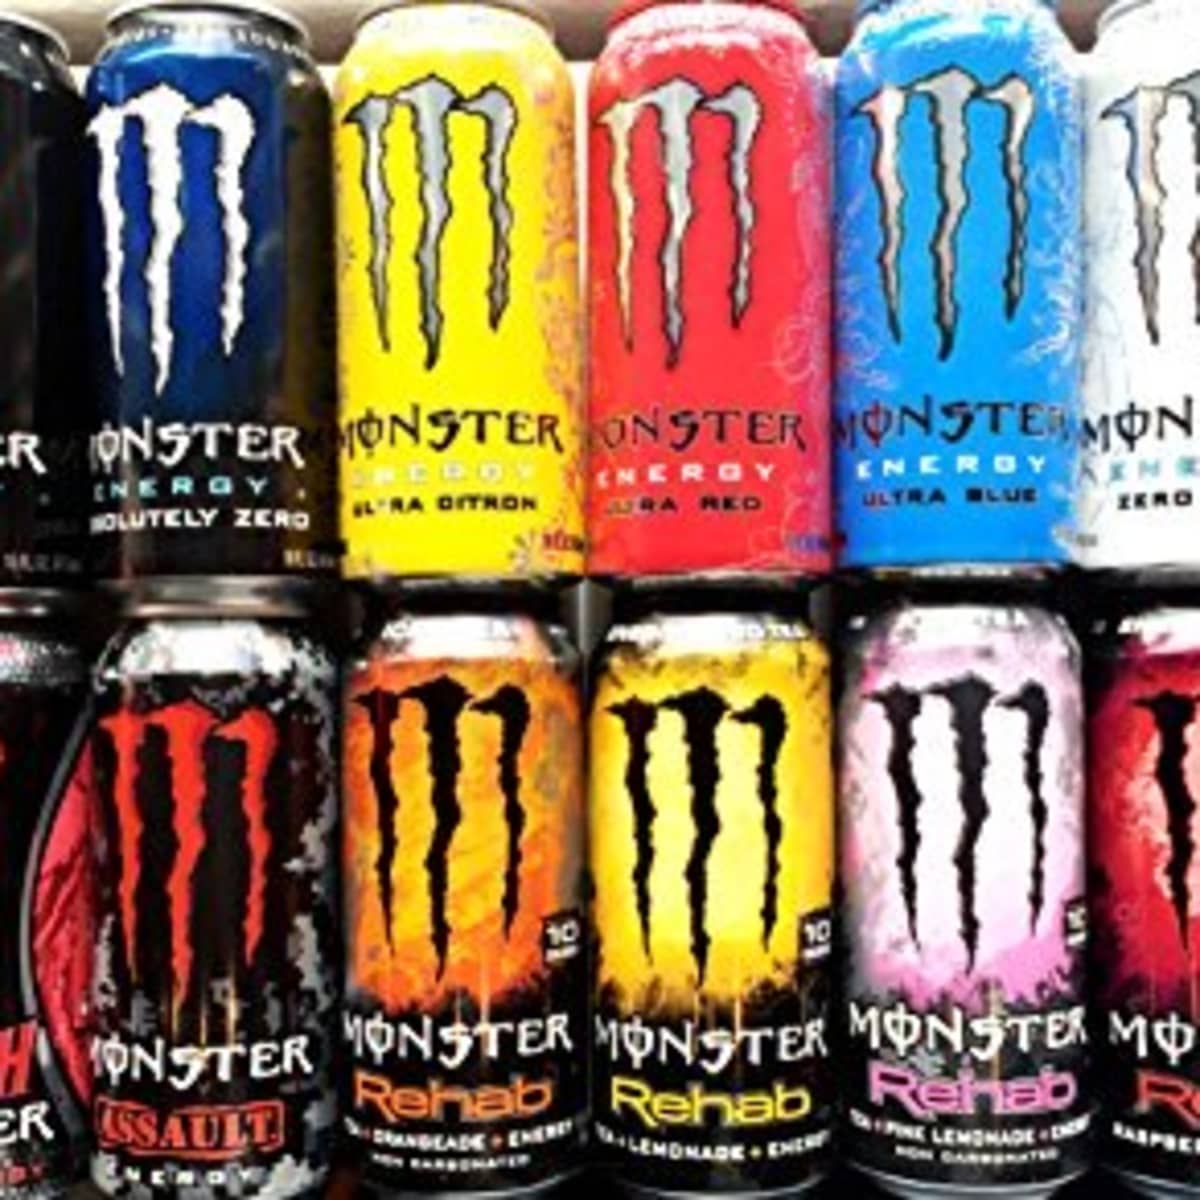 Monster Energy adds caffeine content to labels